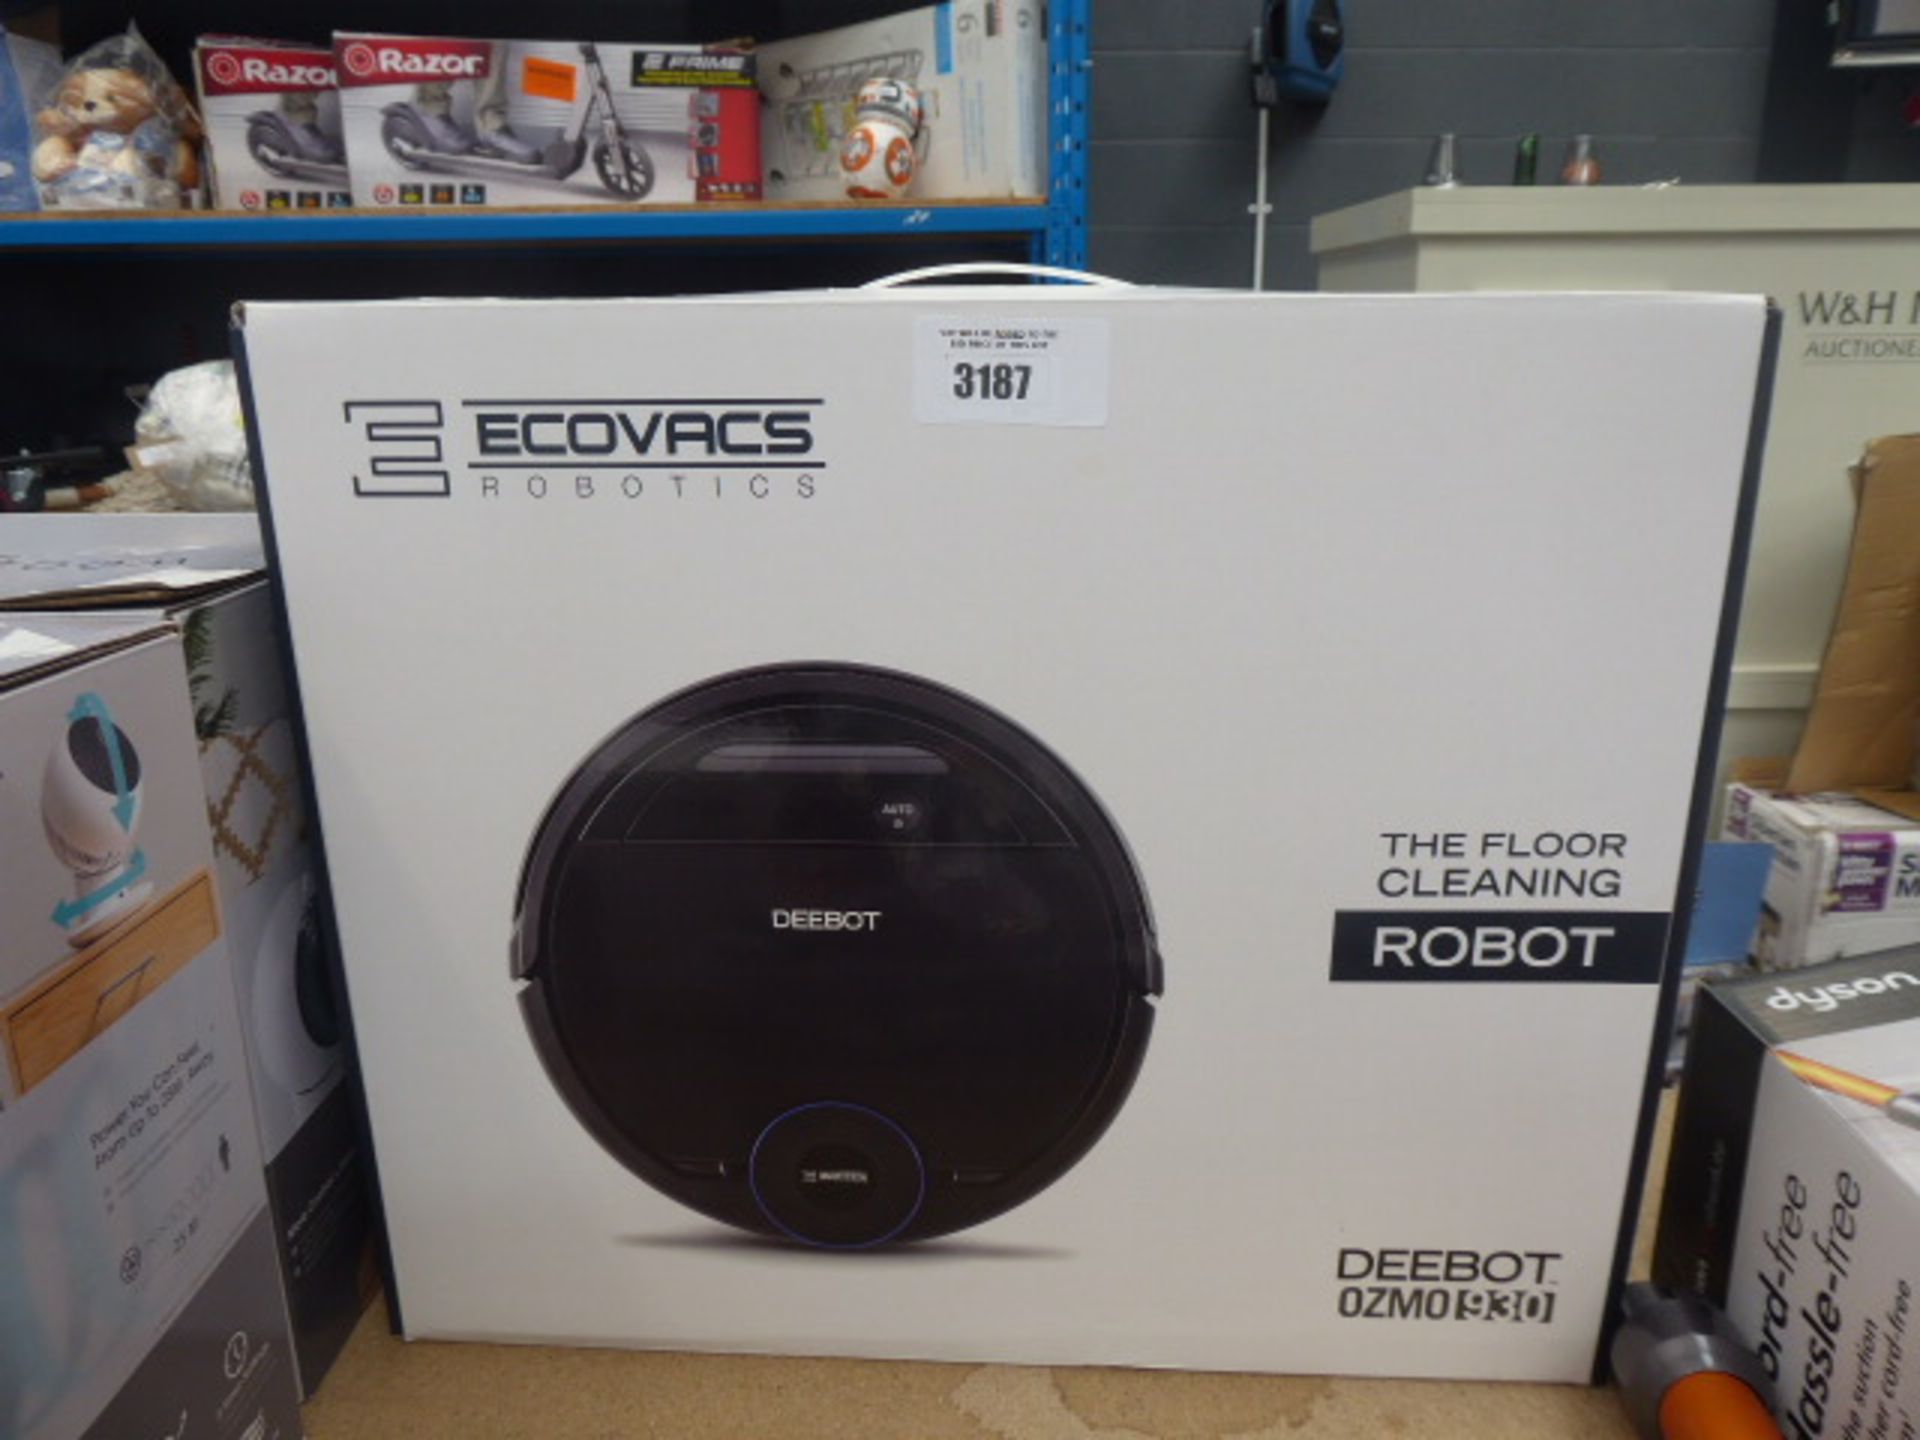 Boxed D Bot vacuum cleaning robot